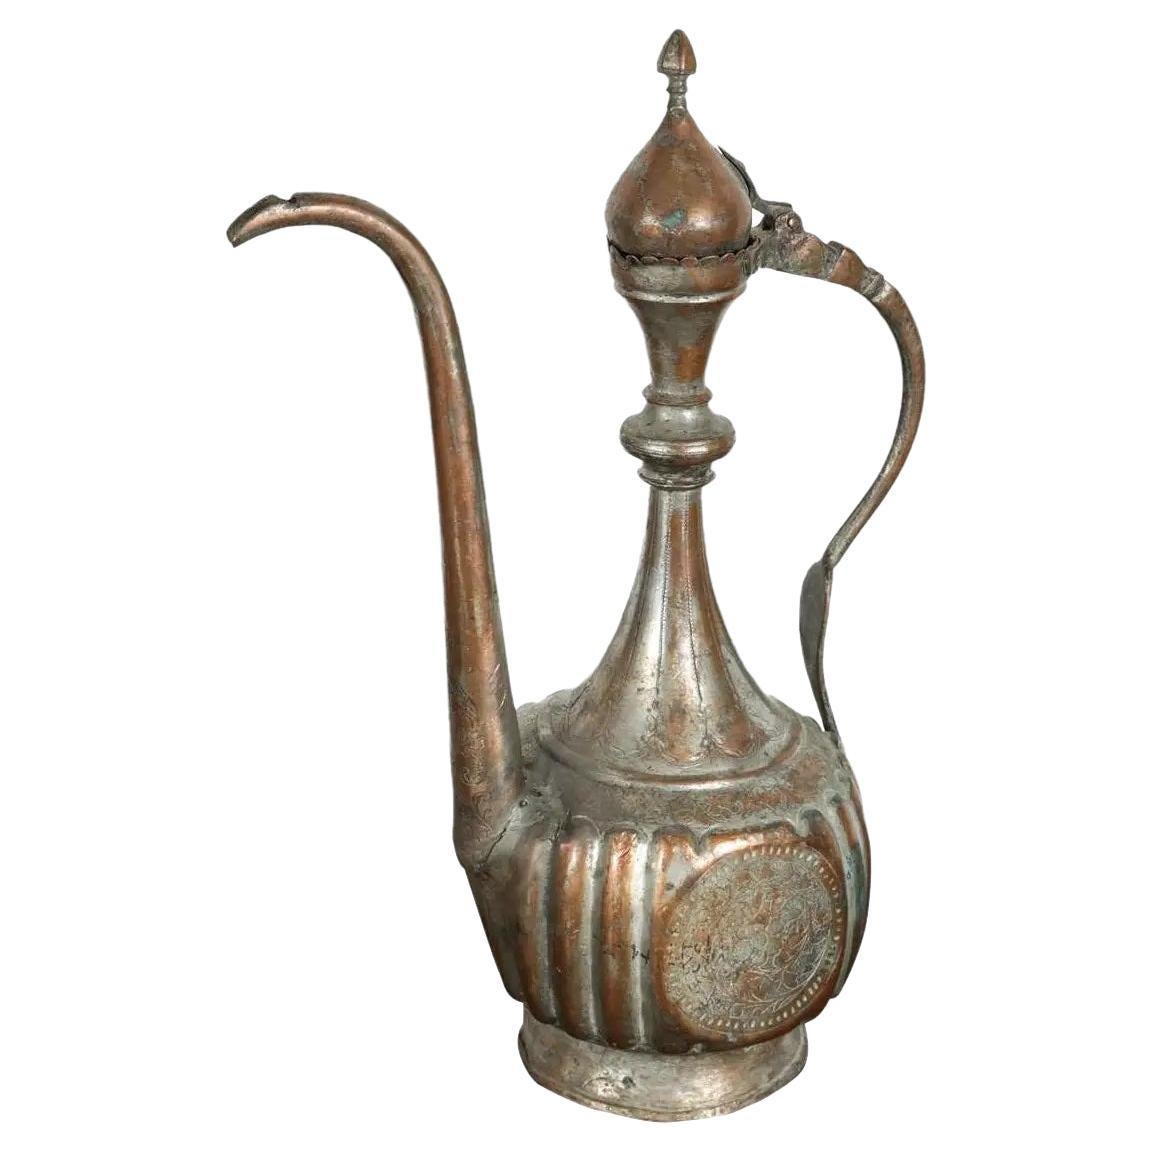 Antique 19th Century Turkish Ottoman Tinned Copper Ewer Pitcher For Sale